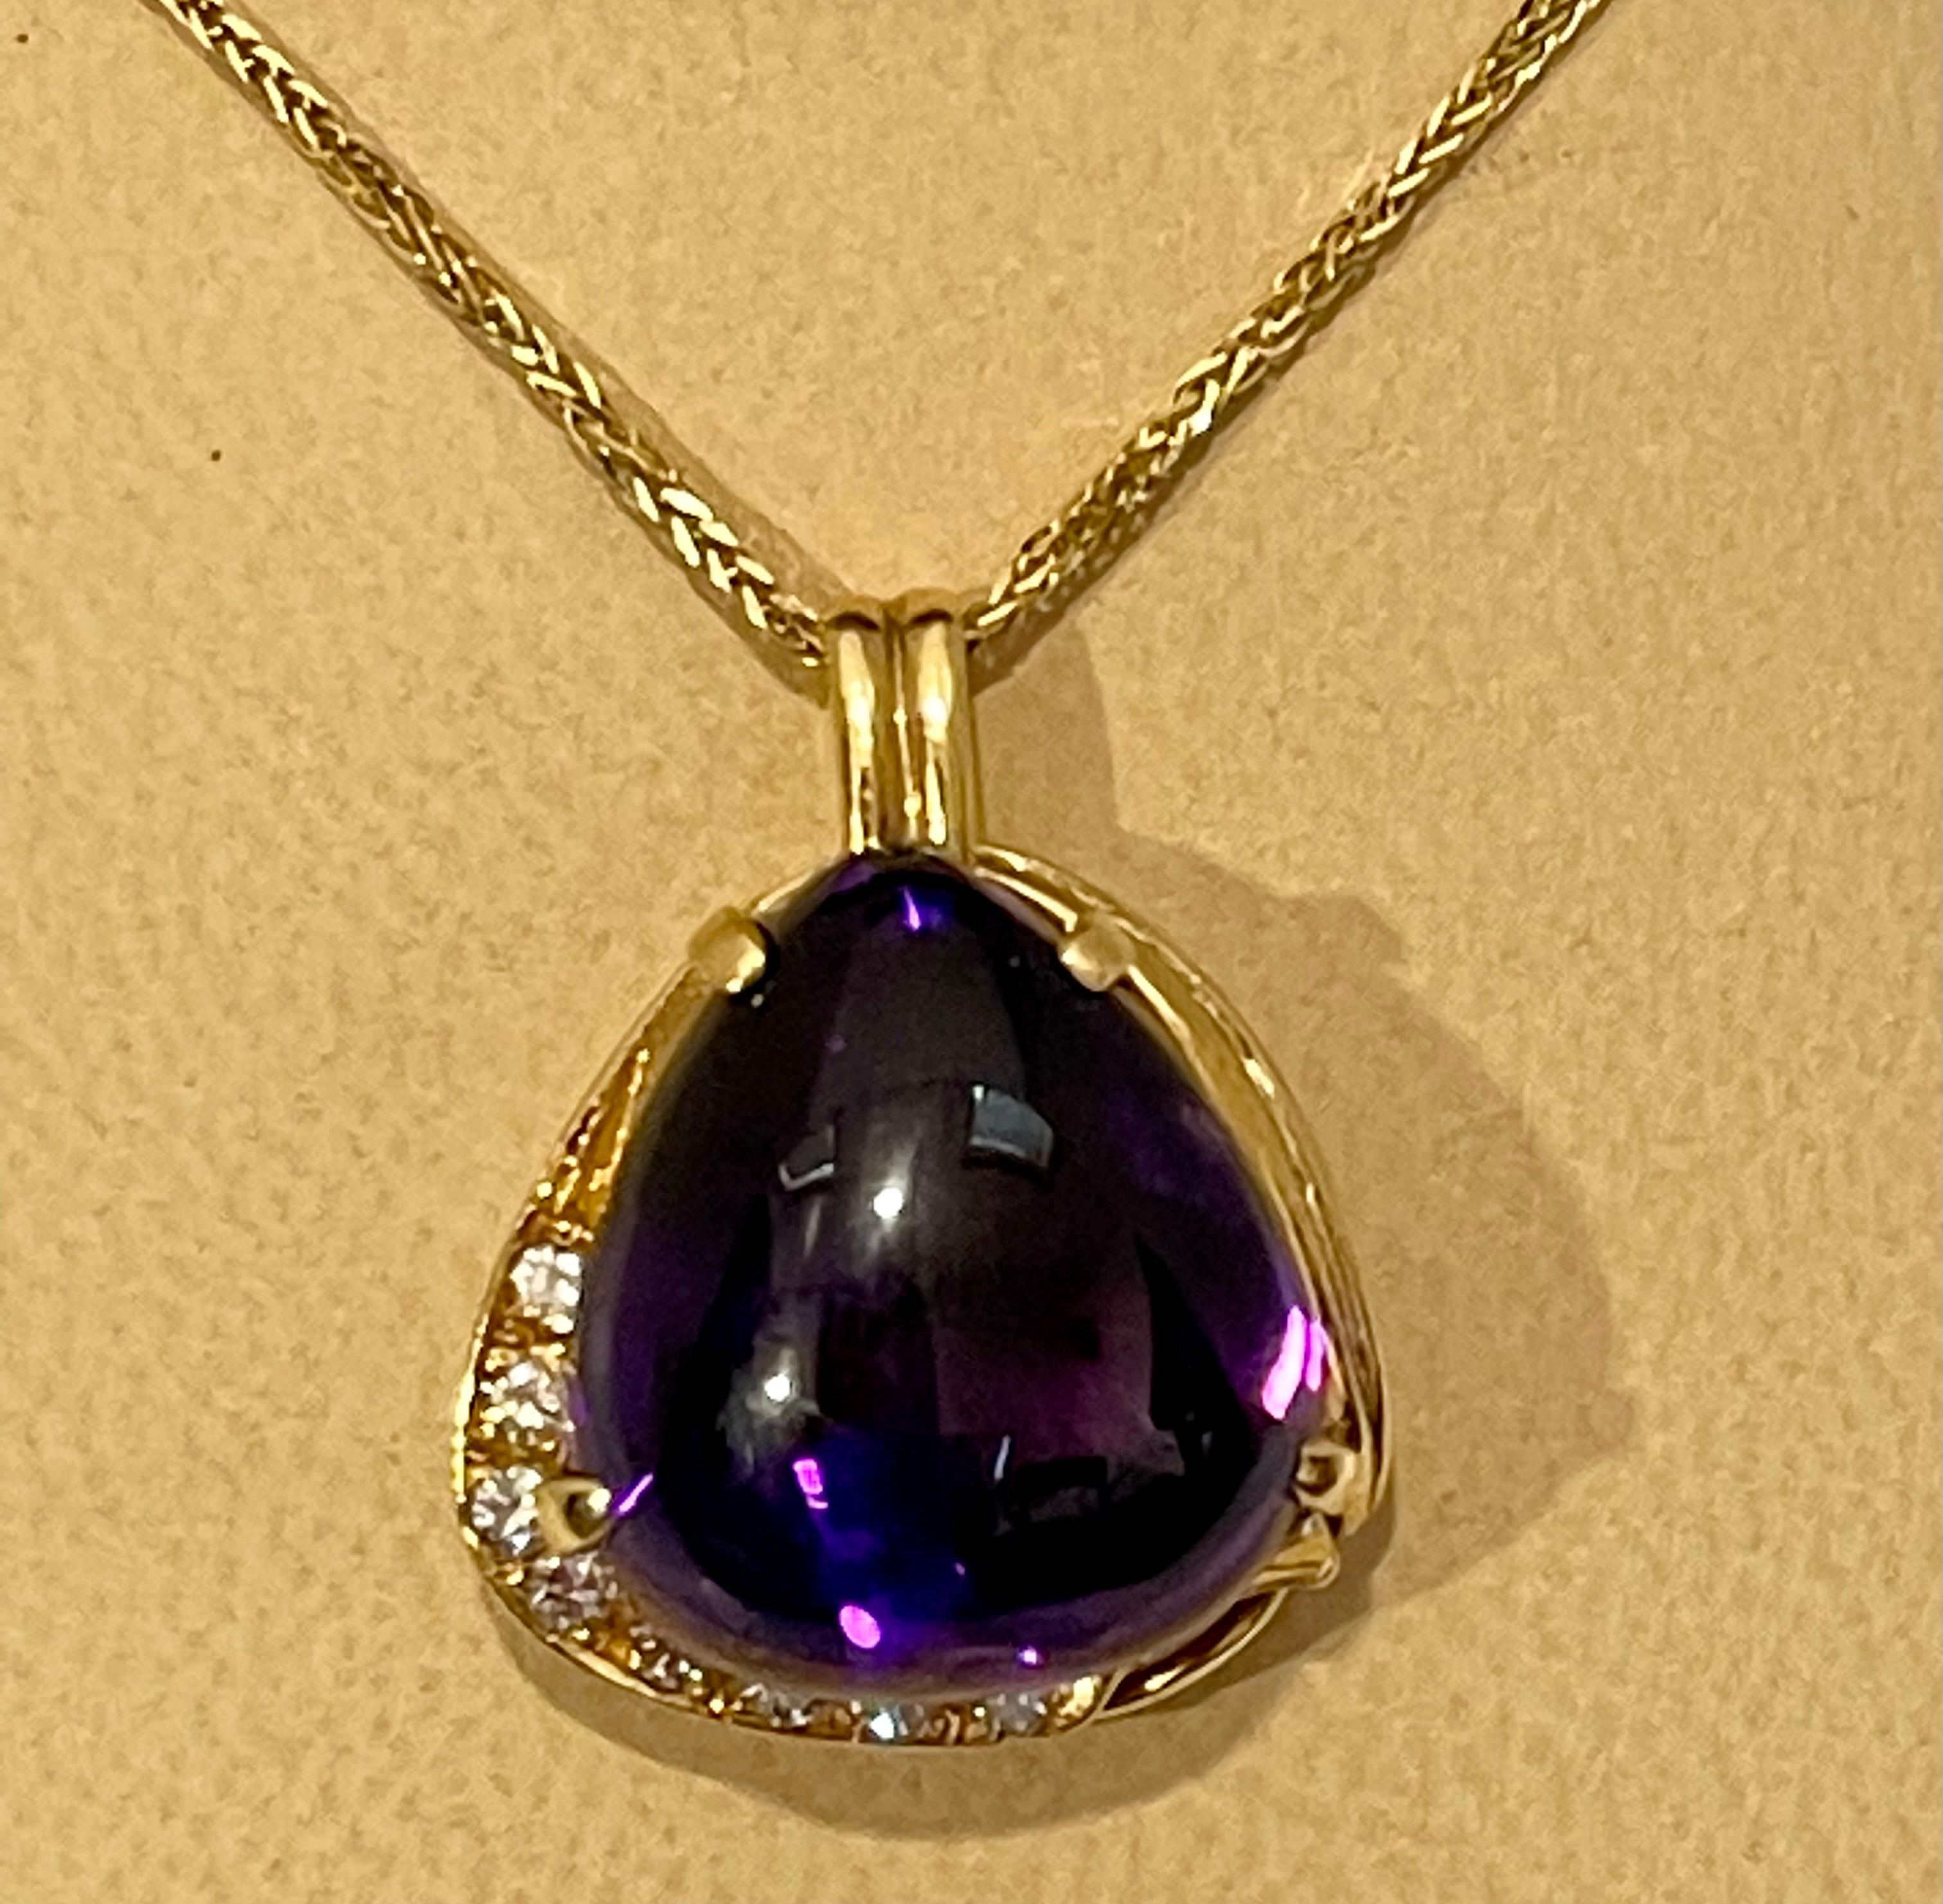 10 Carat Tear Drop Amethyst and Diamonds Pendent Necklace 18 Karat Yellow Gold For Sale 14